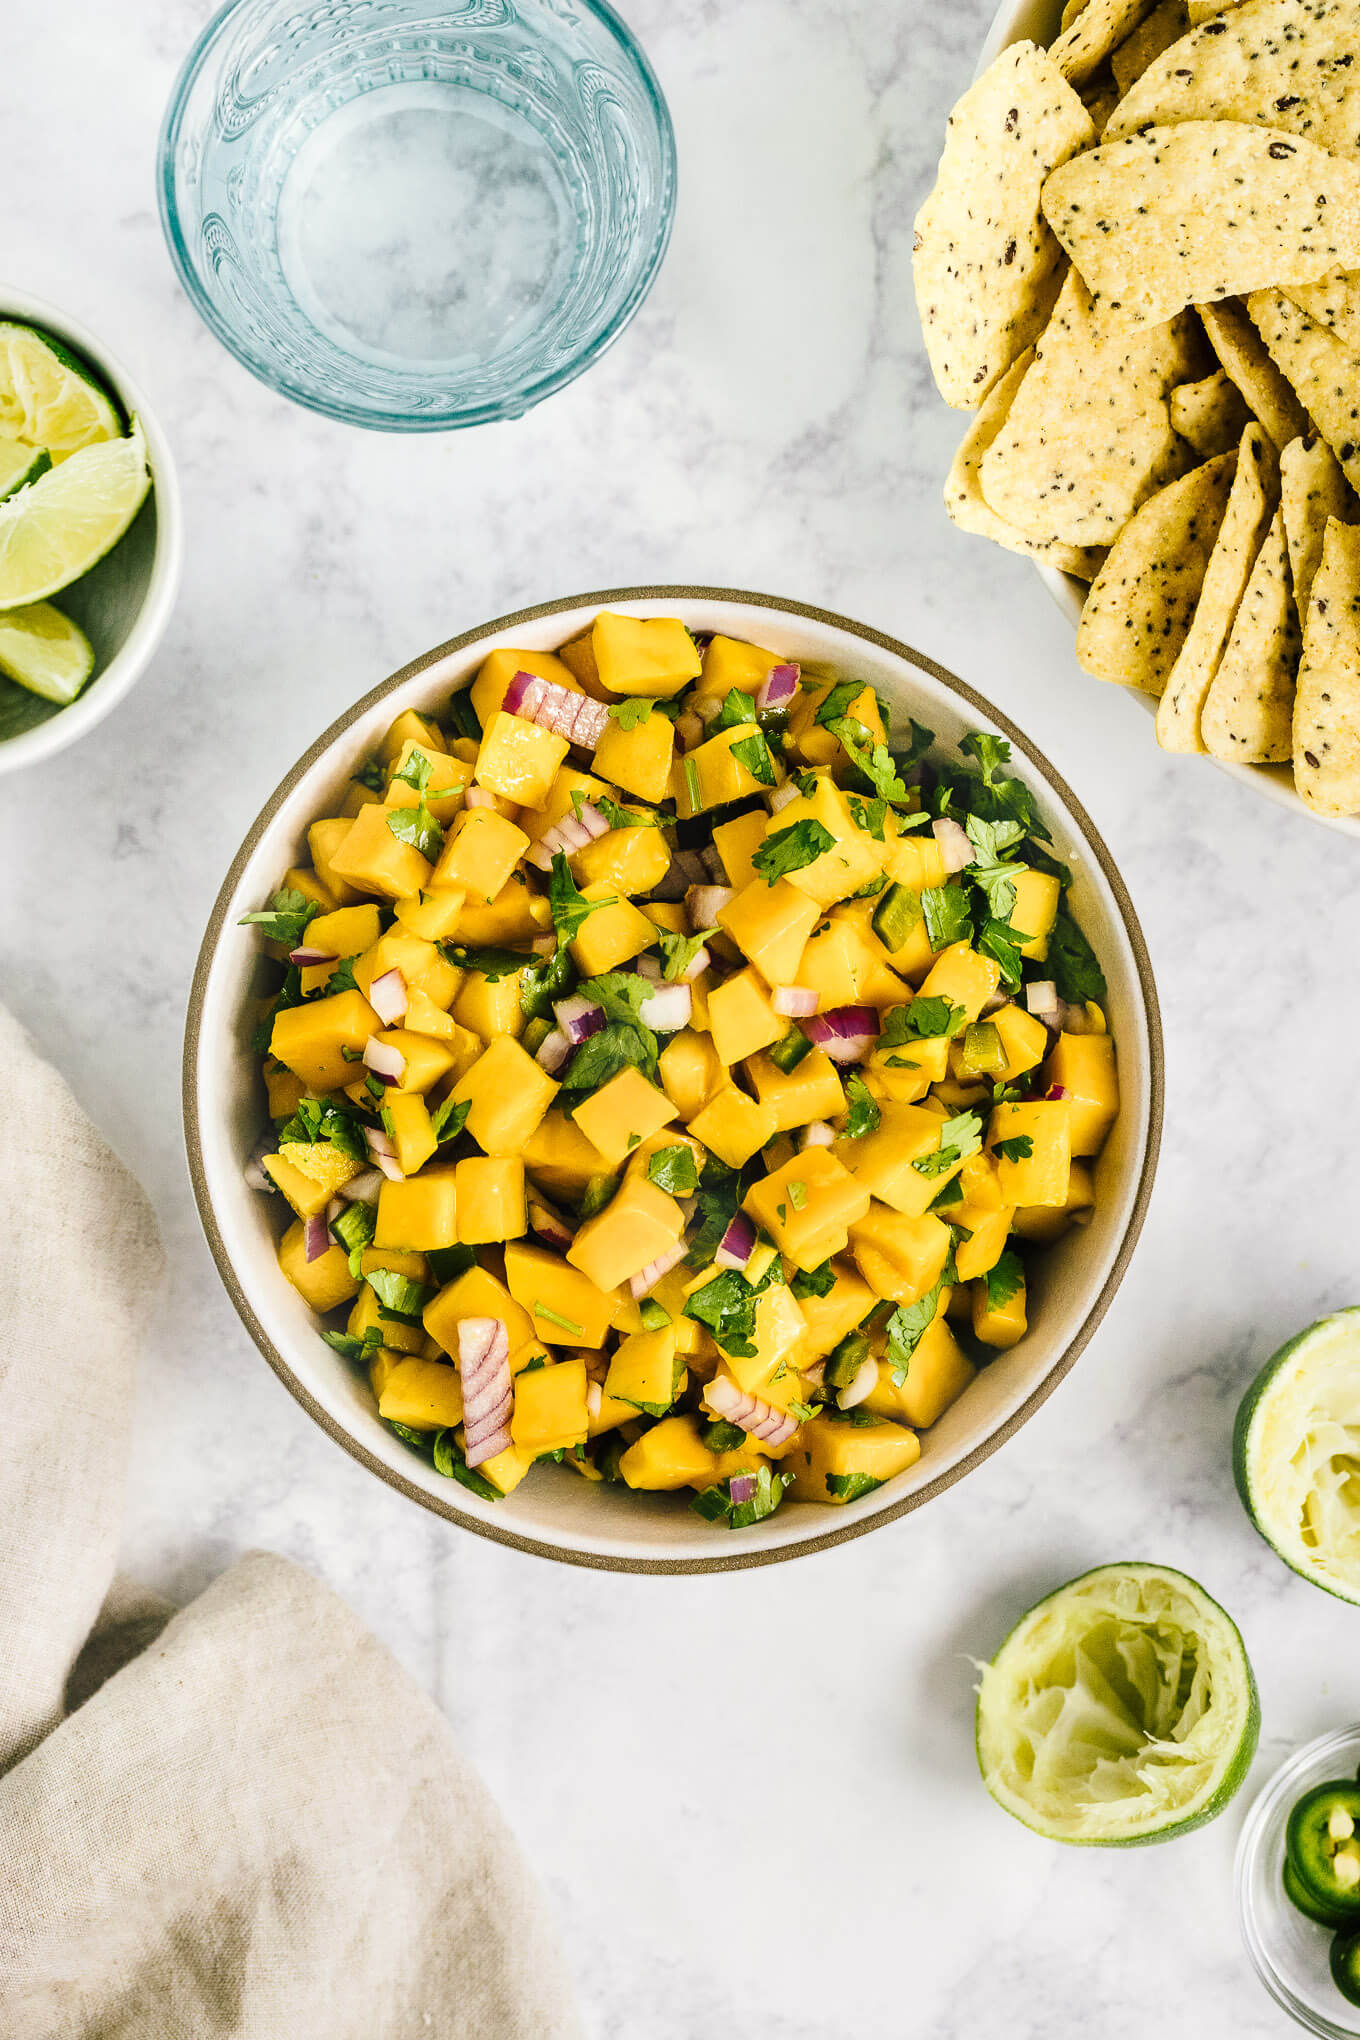 Fresh mango salsa - this 5 ingredient recipe makes for a healthy summer dip.